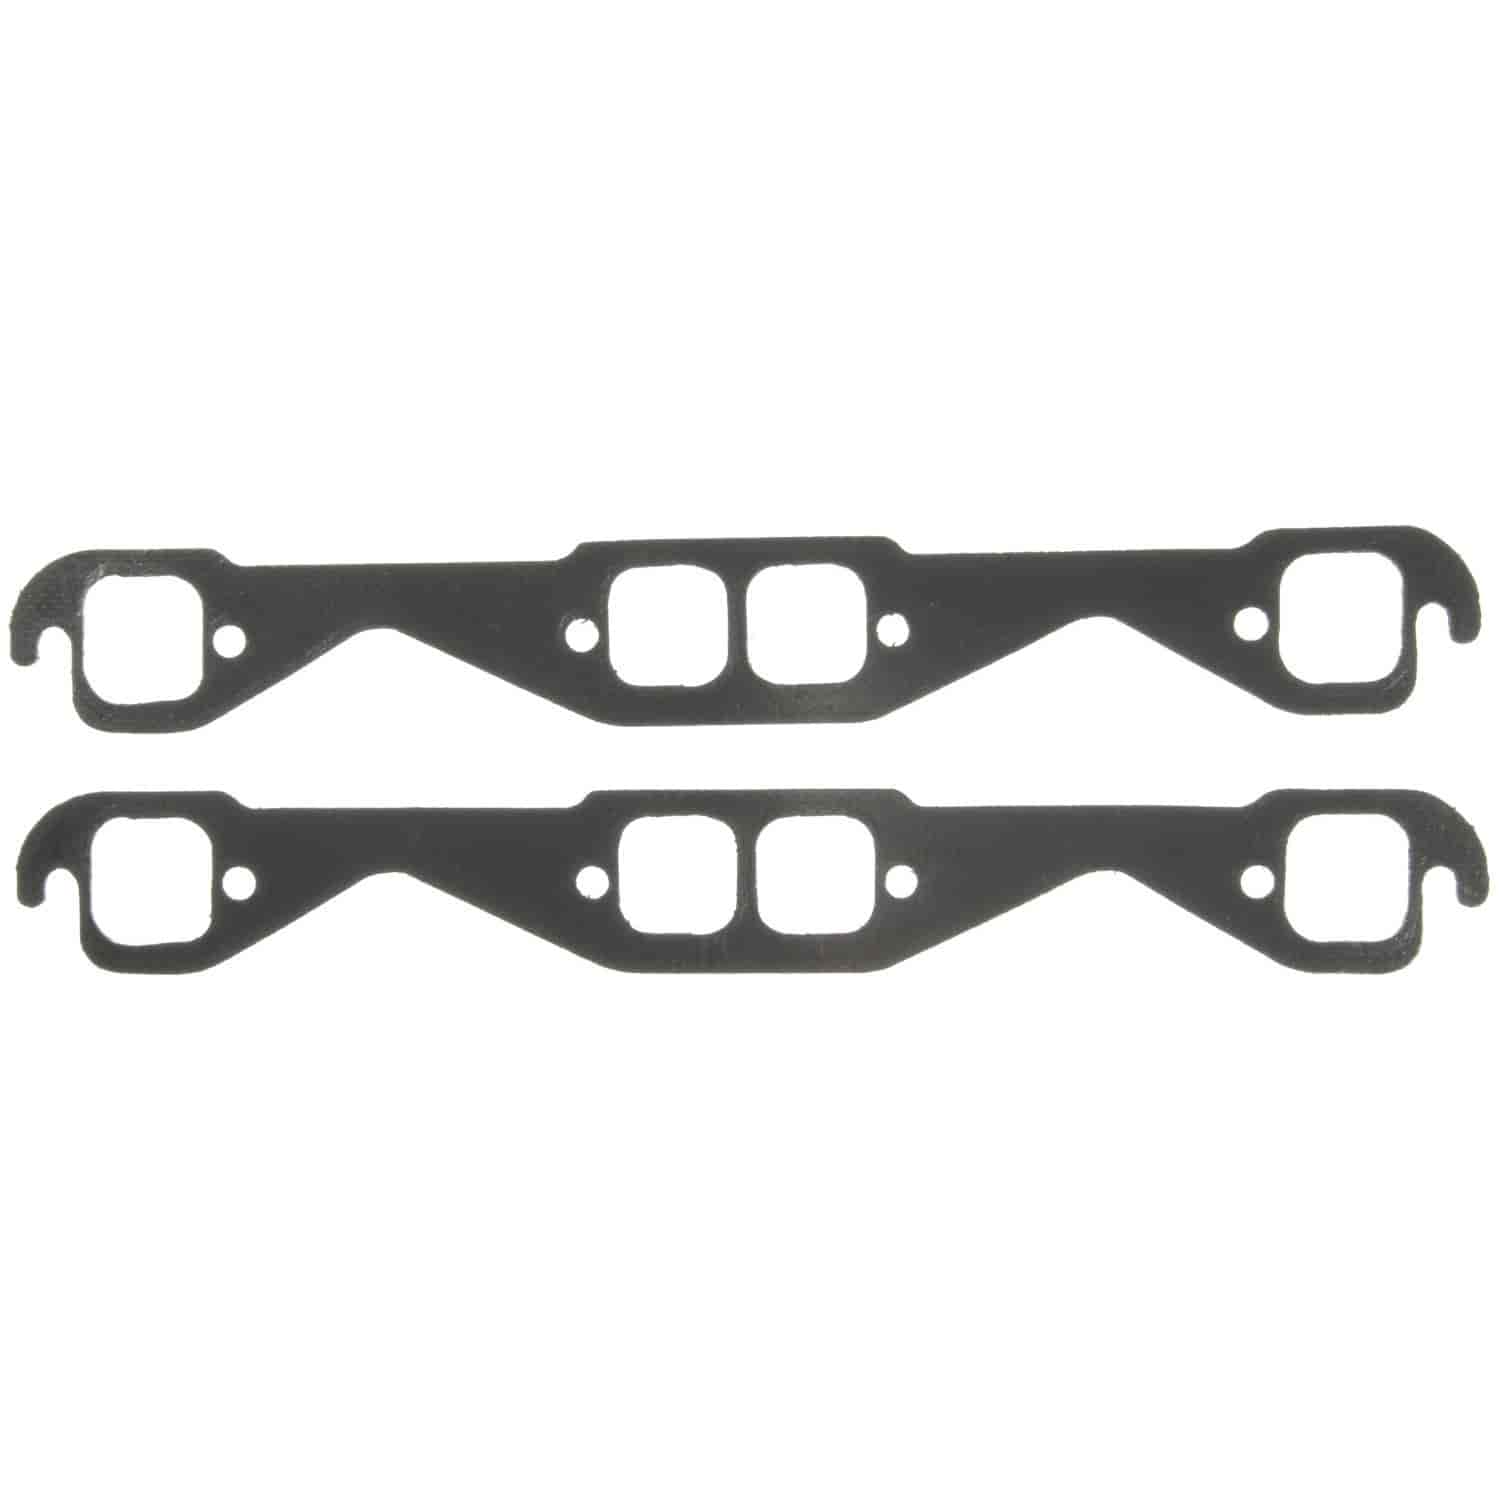 Performance Exhaust Manifold Gasket Set Small Block Chevy V8 262/267/283/302/305/307/327/350/400